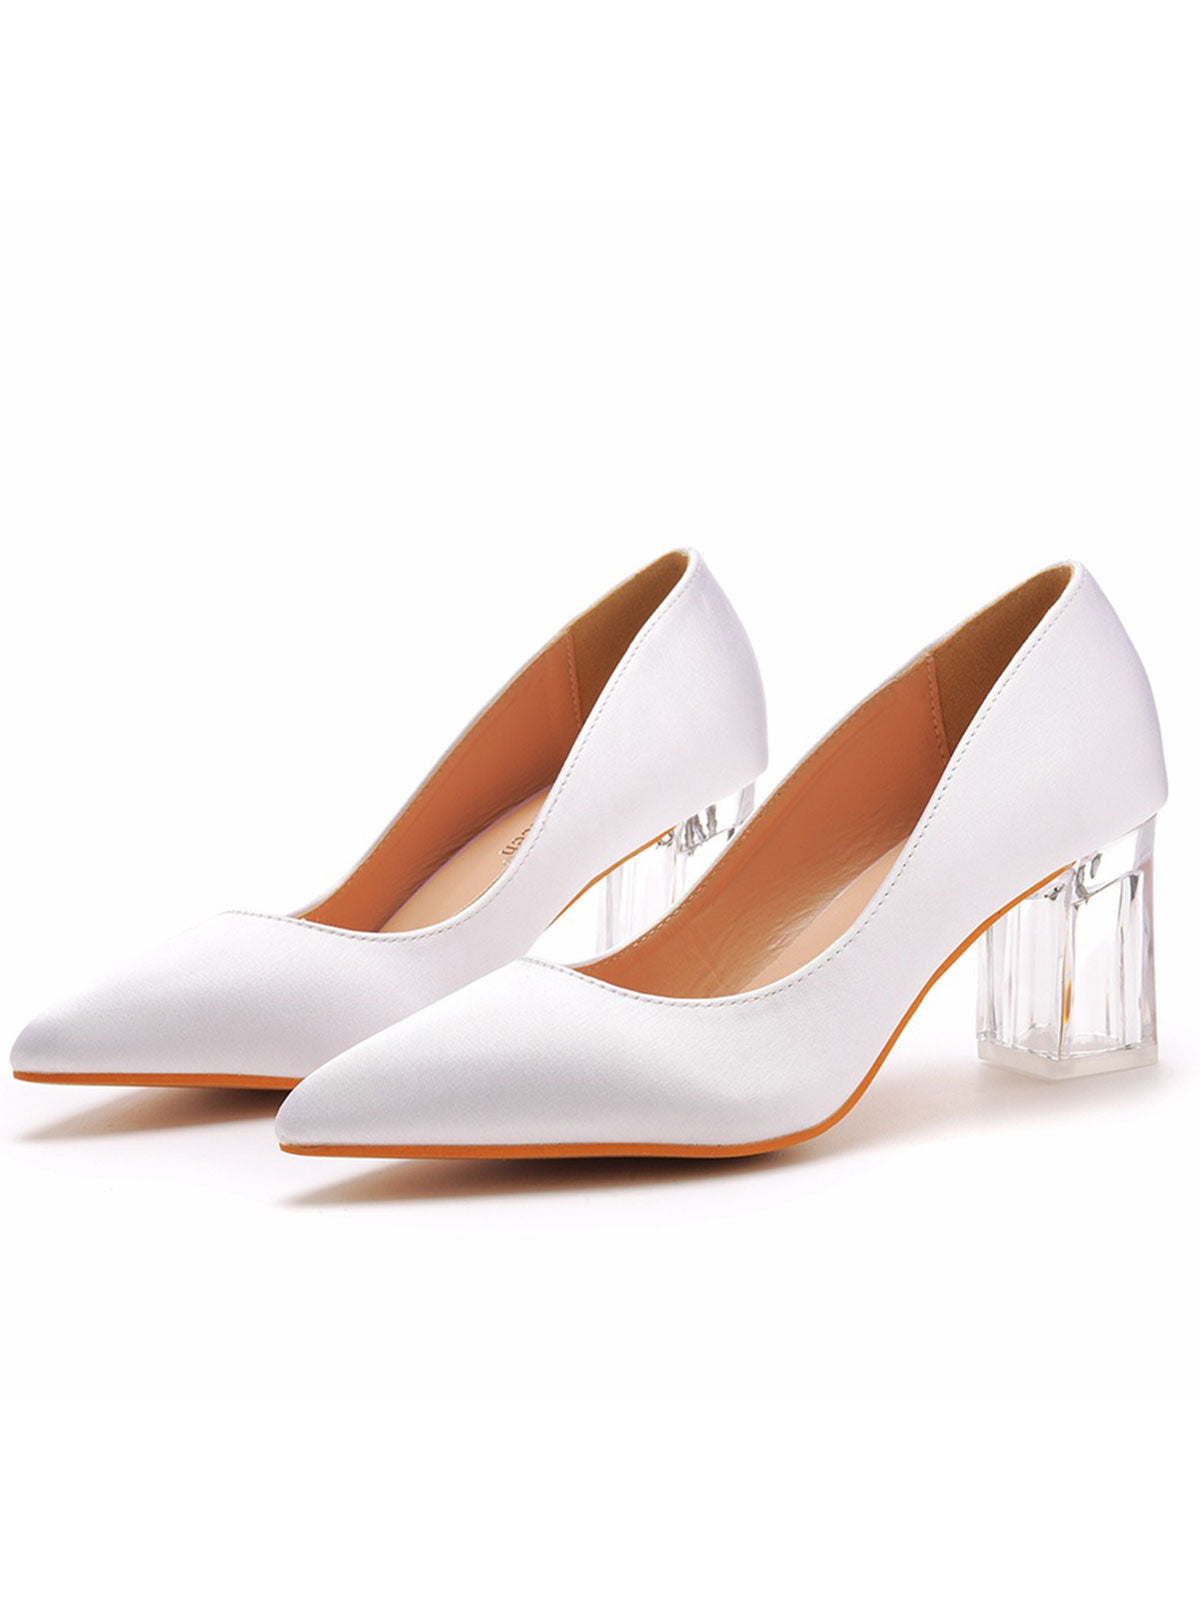 Simple White Pointed Toe Transparent Block Heels